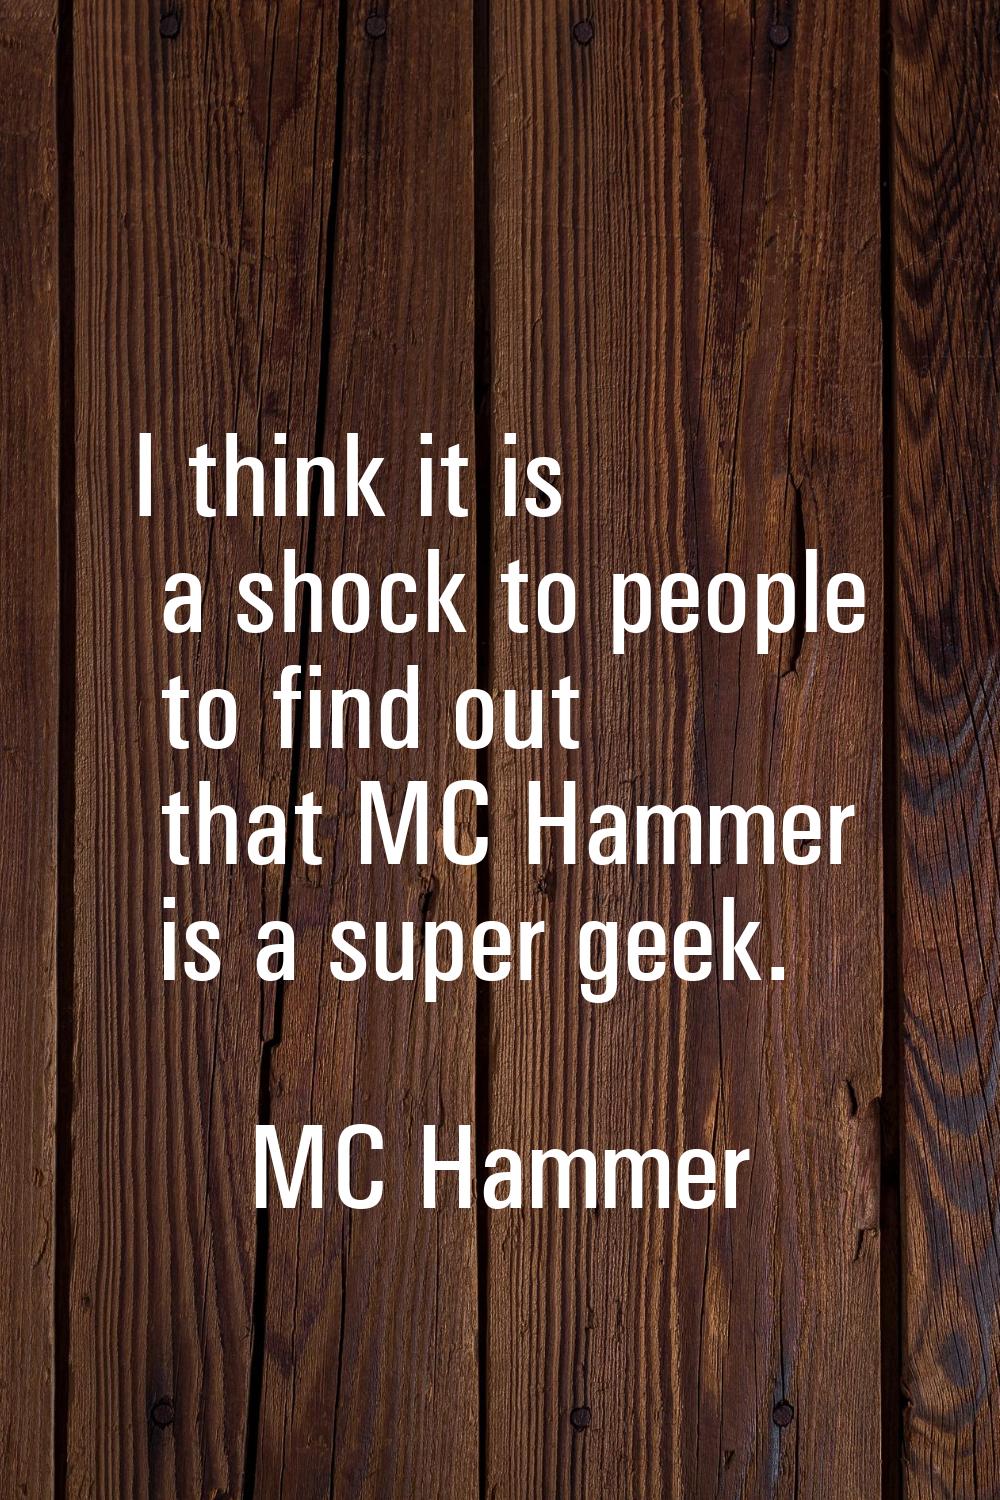 I think it is a shock to people to find out that MC Hammer is a super geek.